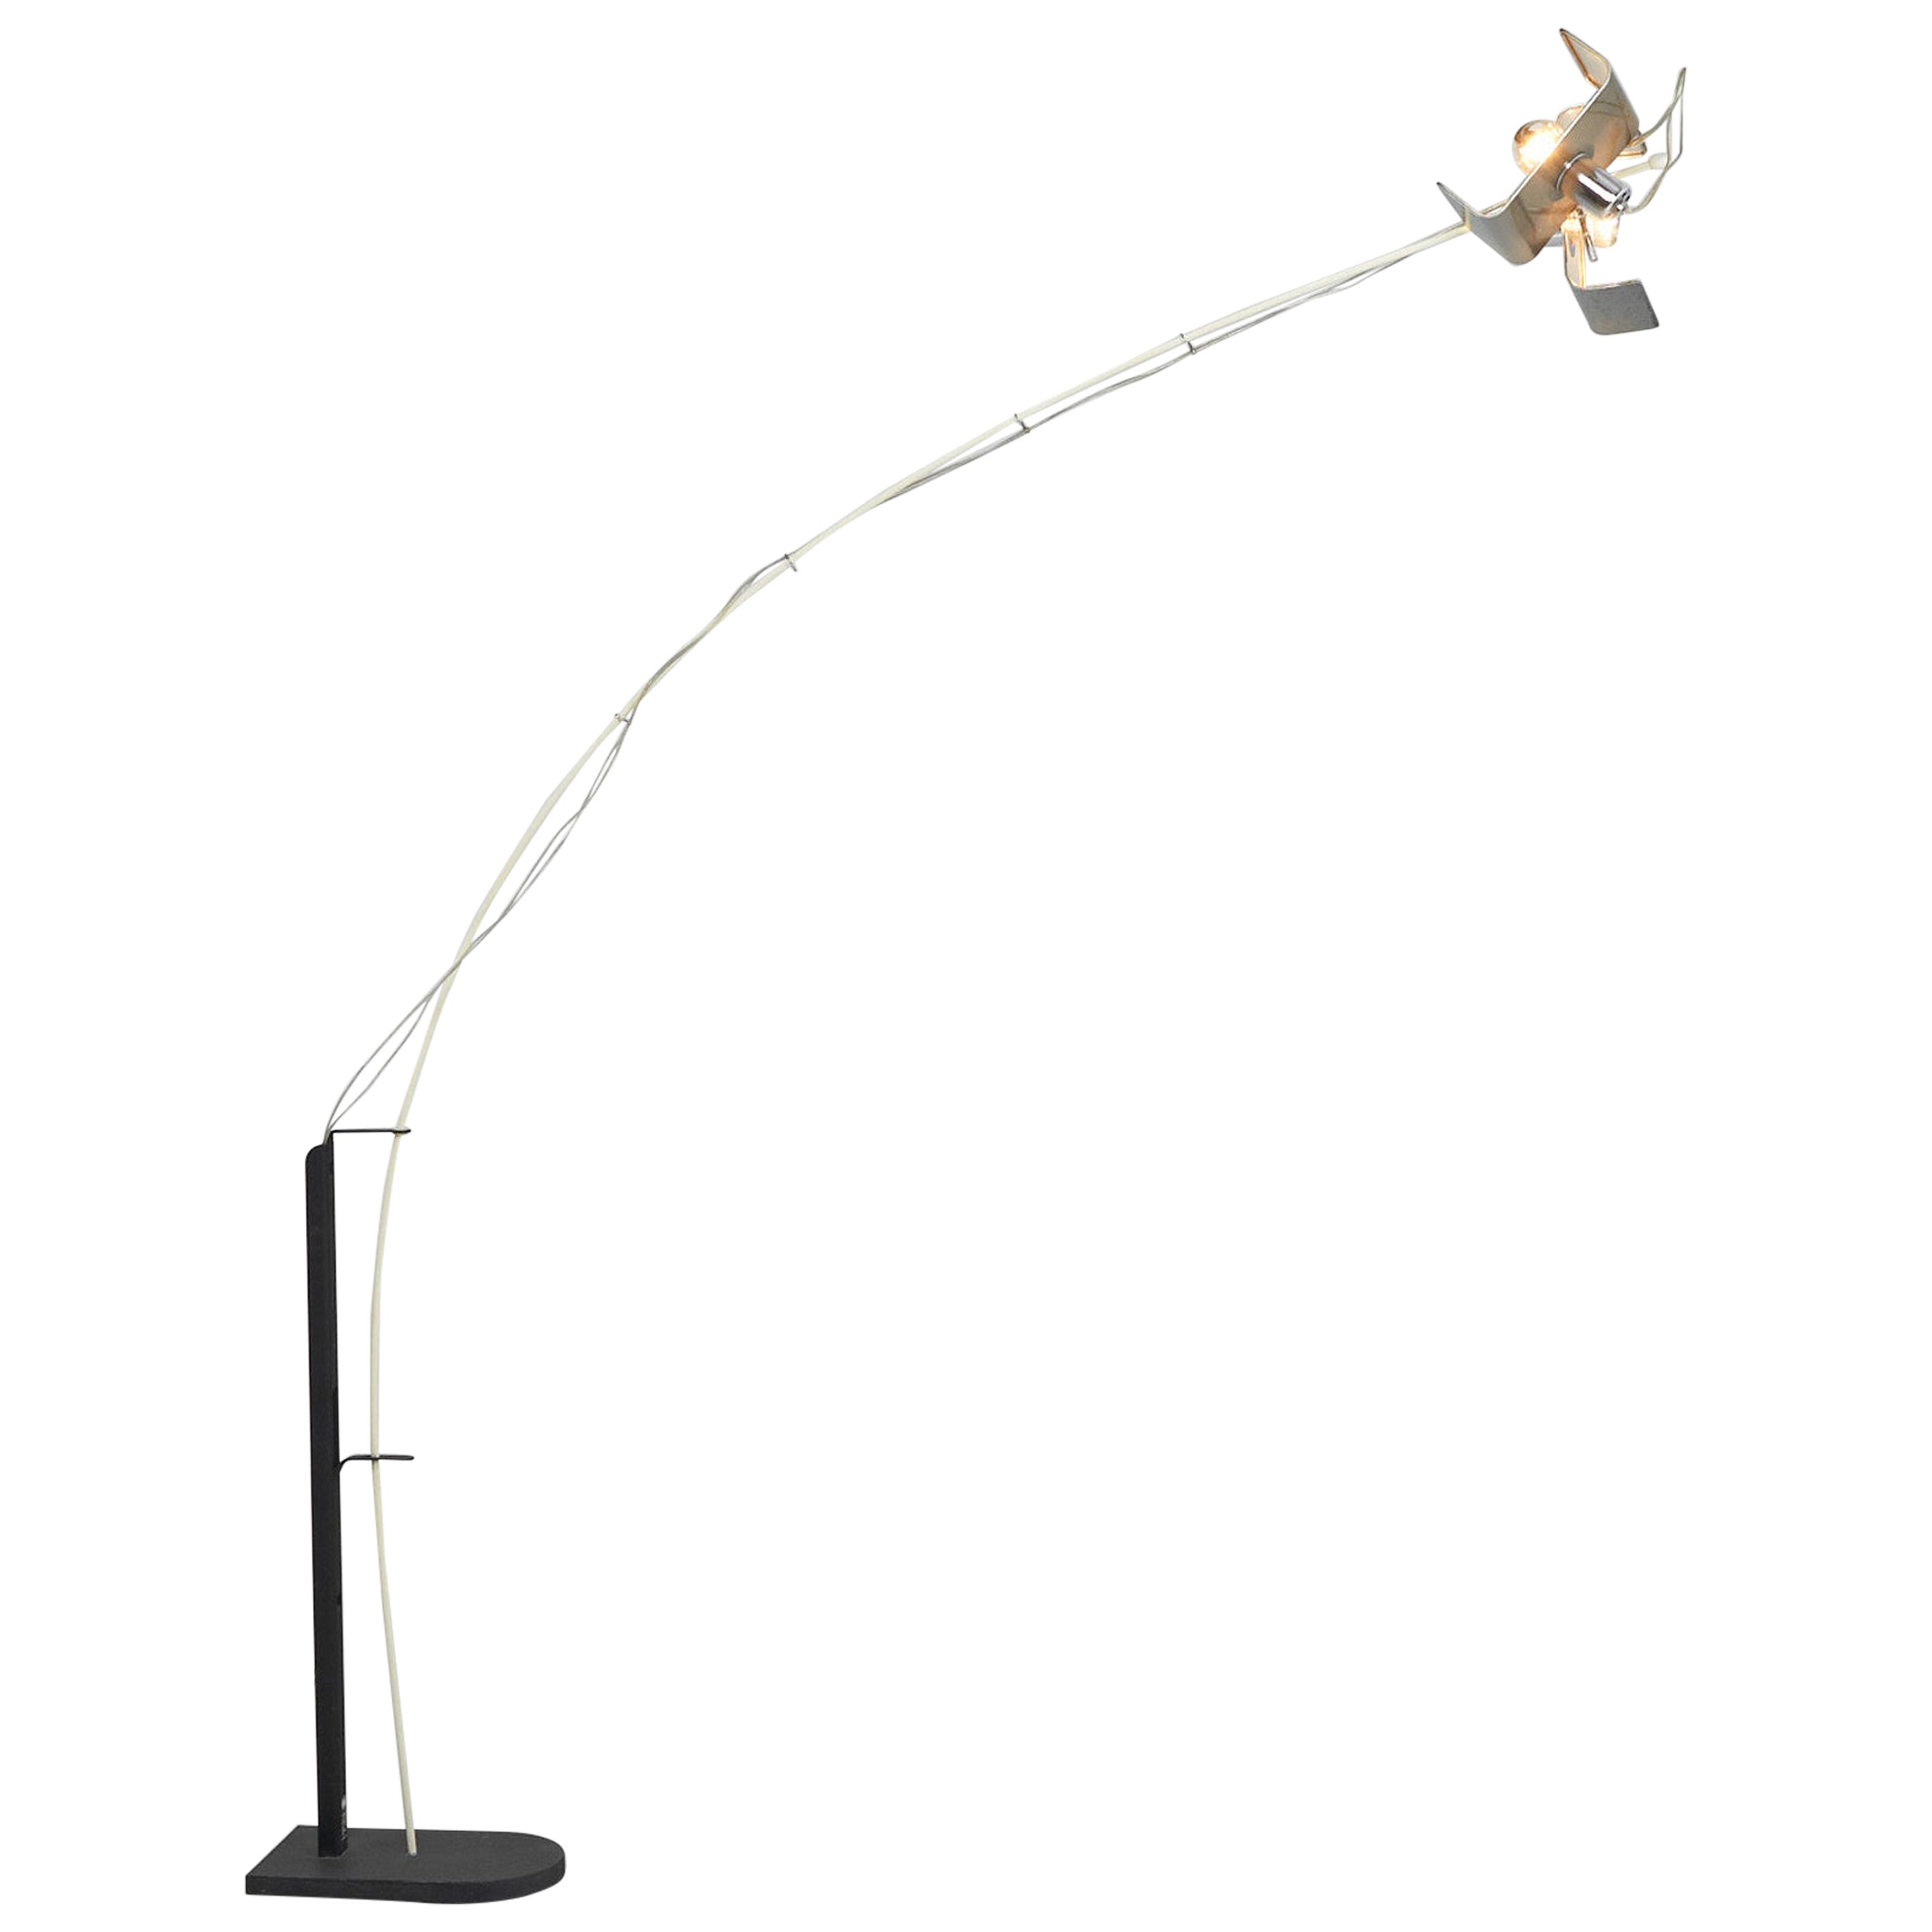 Valmassoi Conti L'Amo Floor Lamp by Luci, Italy, 1970 For Sale